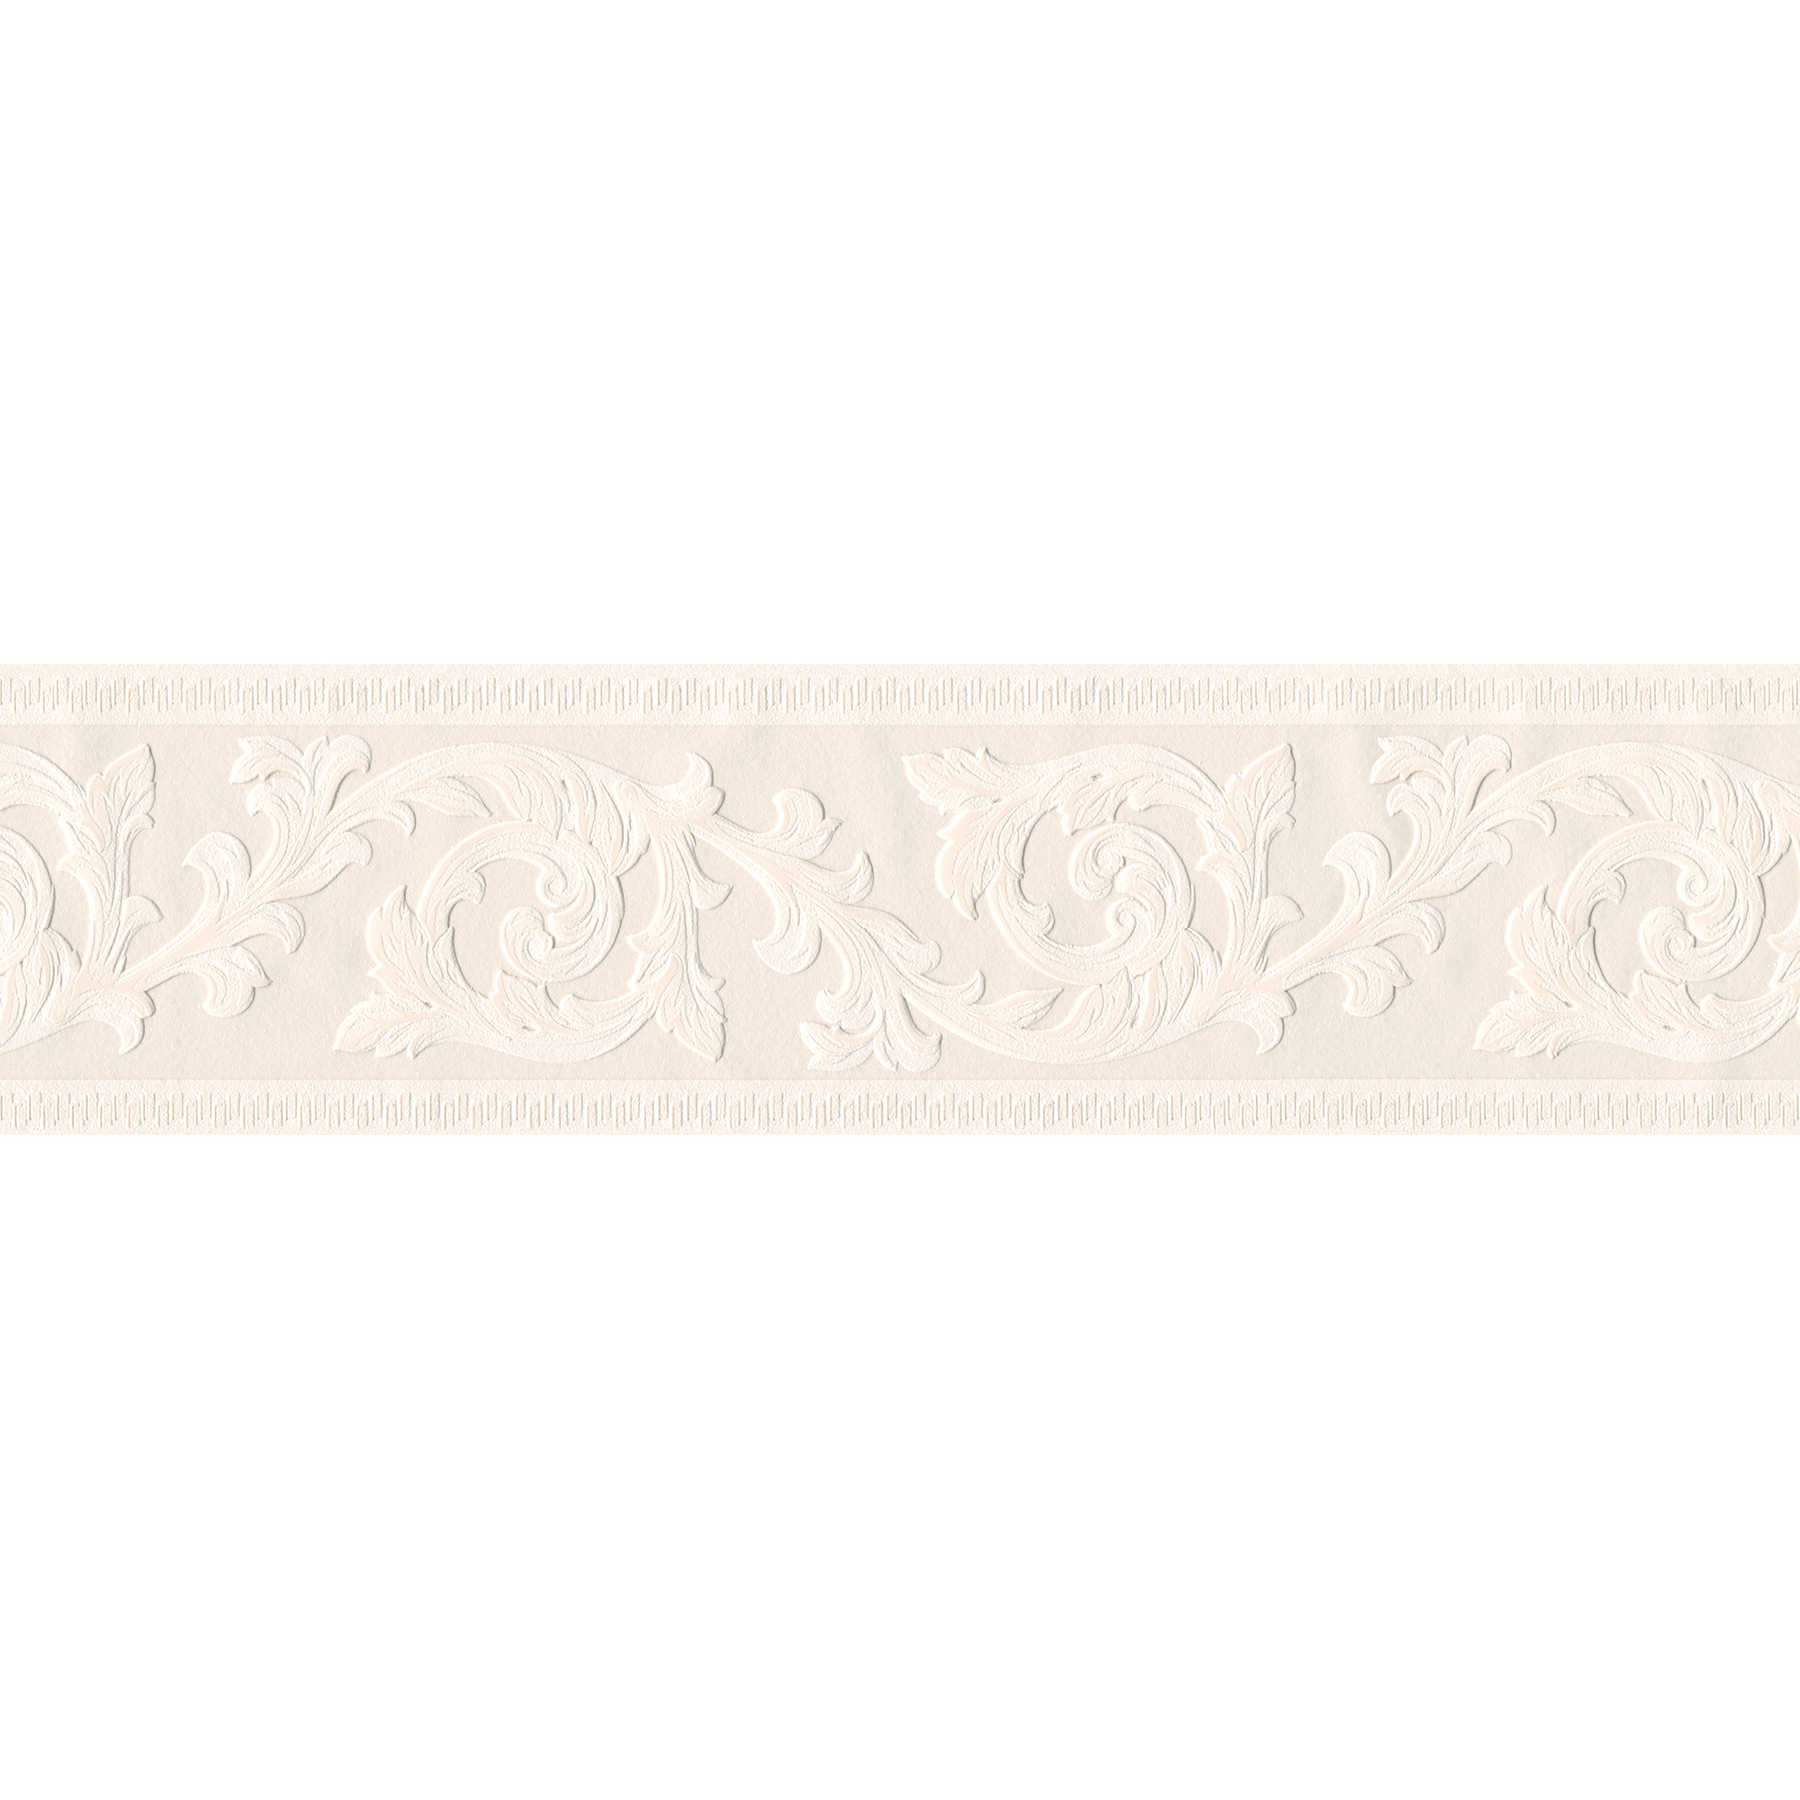         Wide border with floral classic ornaments - Beige, Cream
    